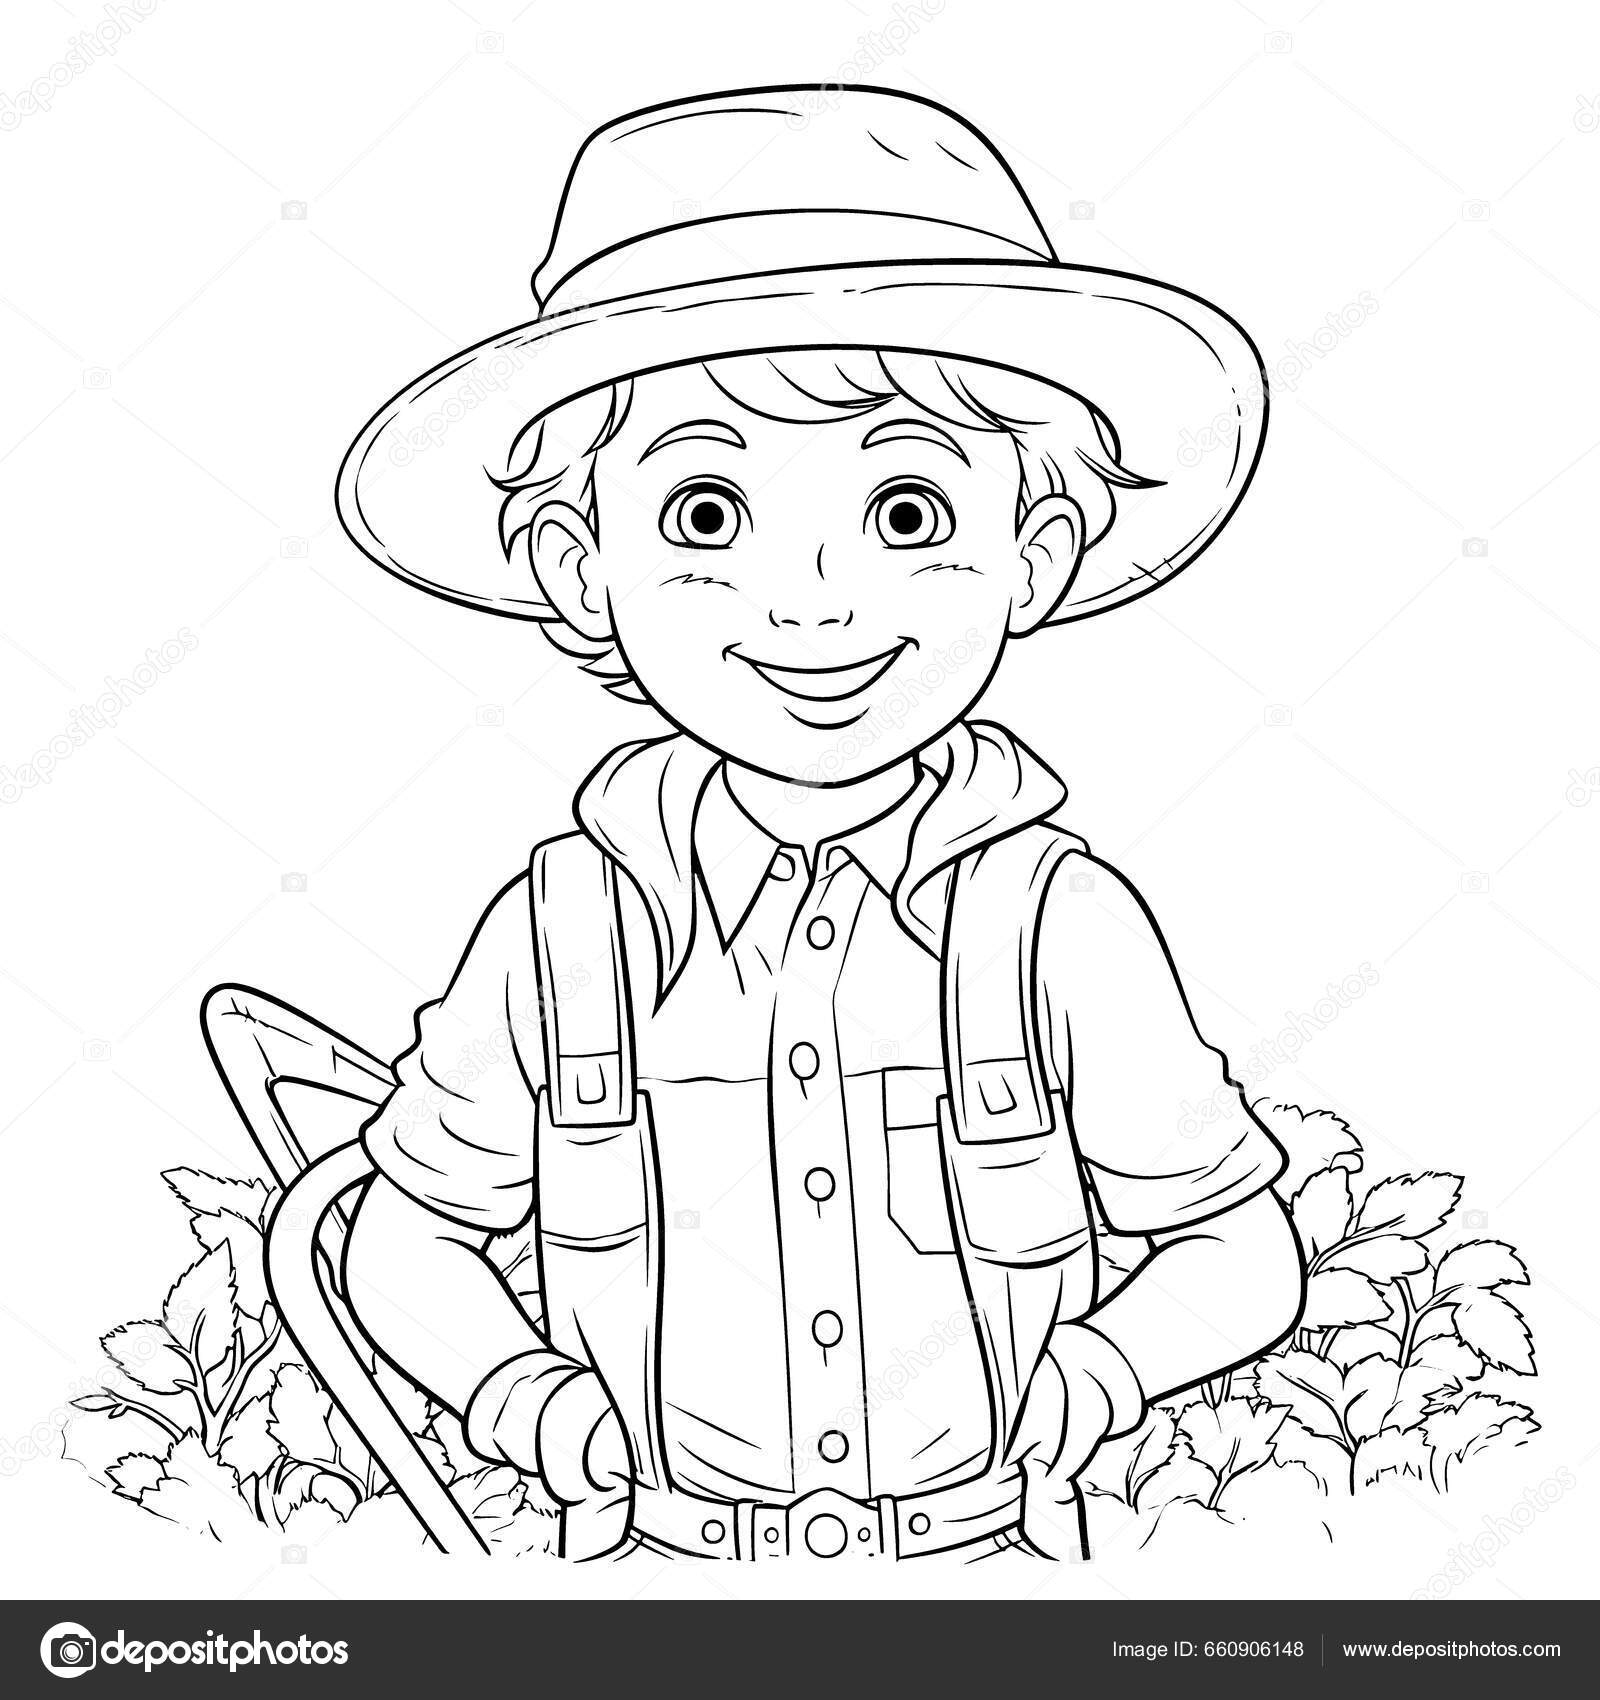 Trator Desenho Para Colorir - Ultra Coloring Pages